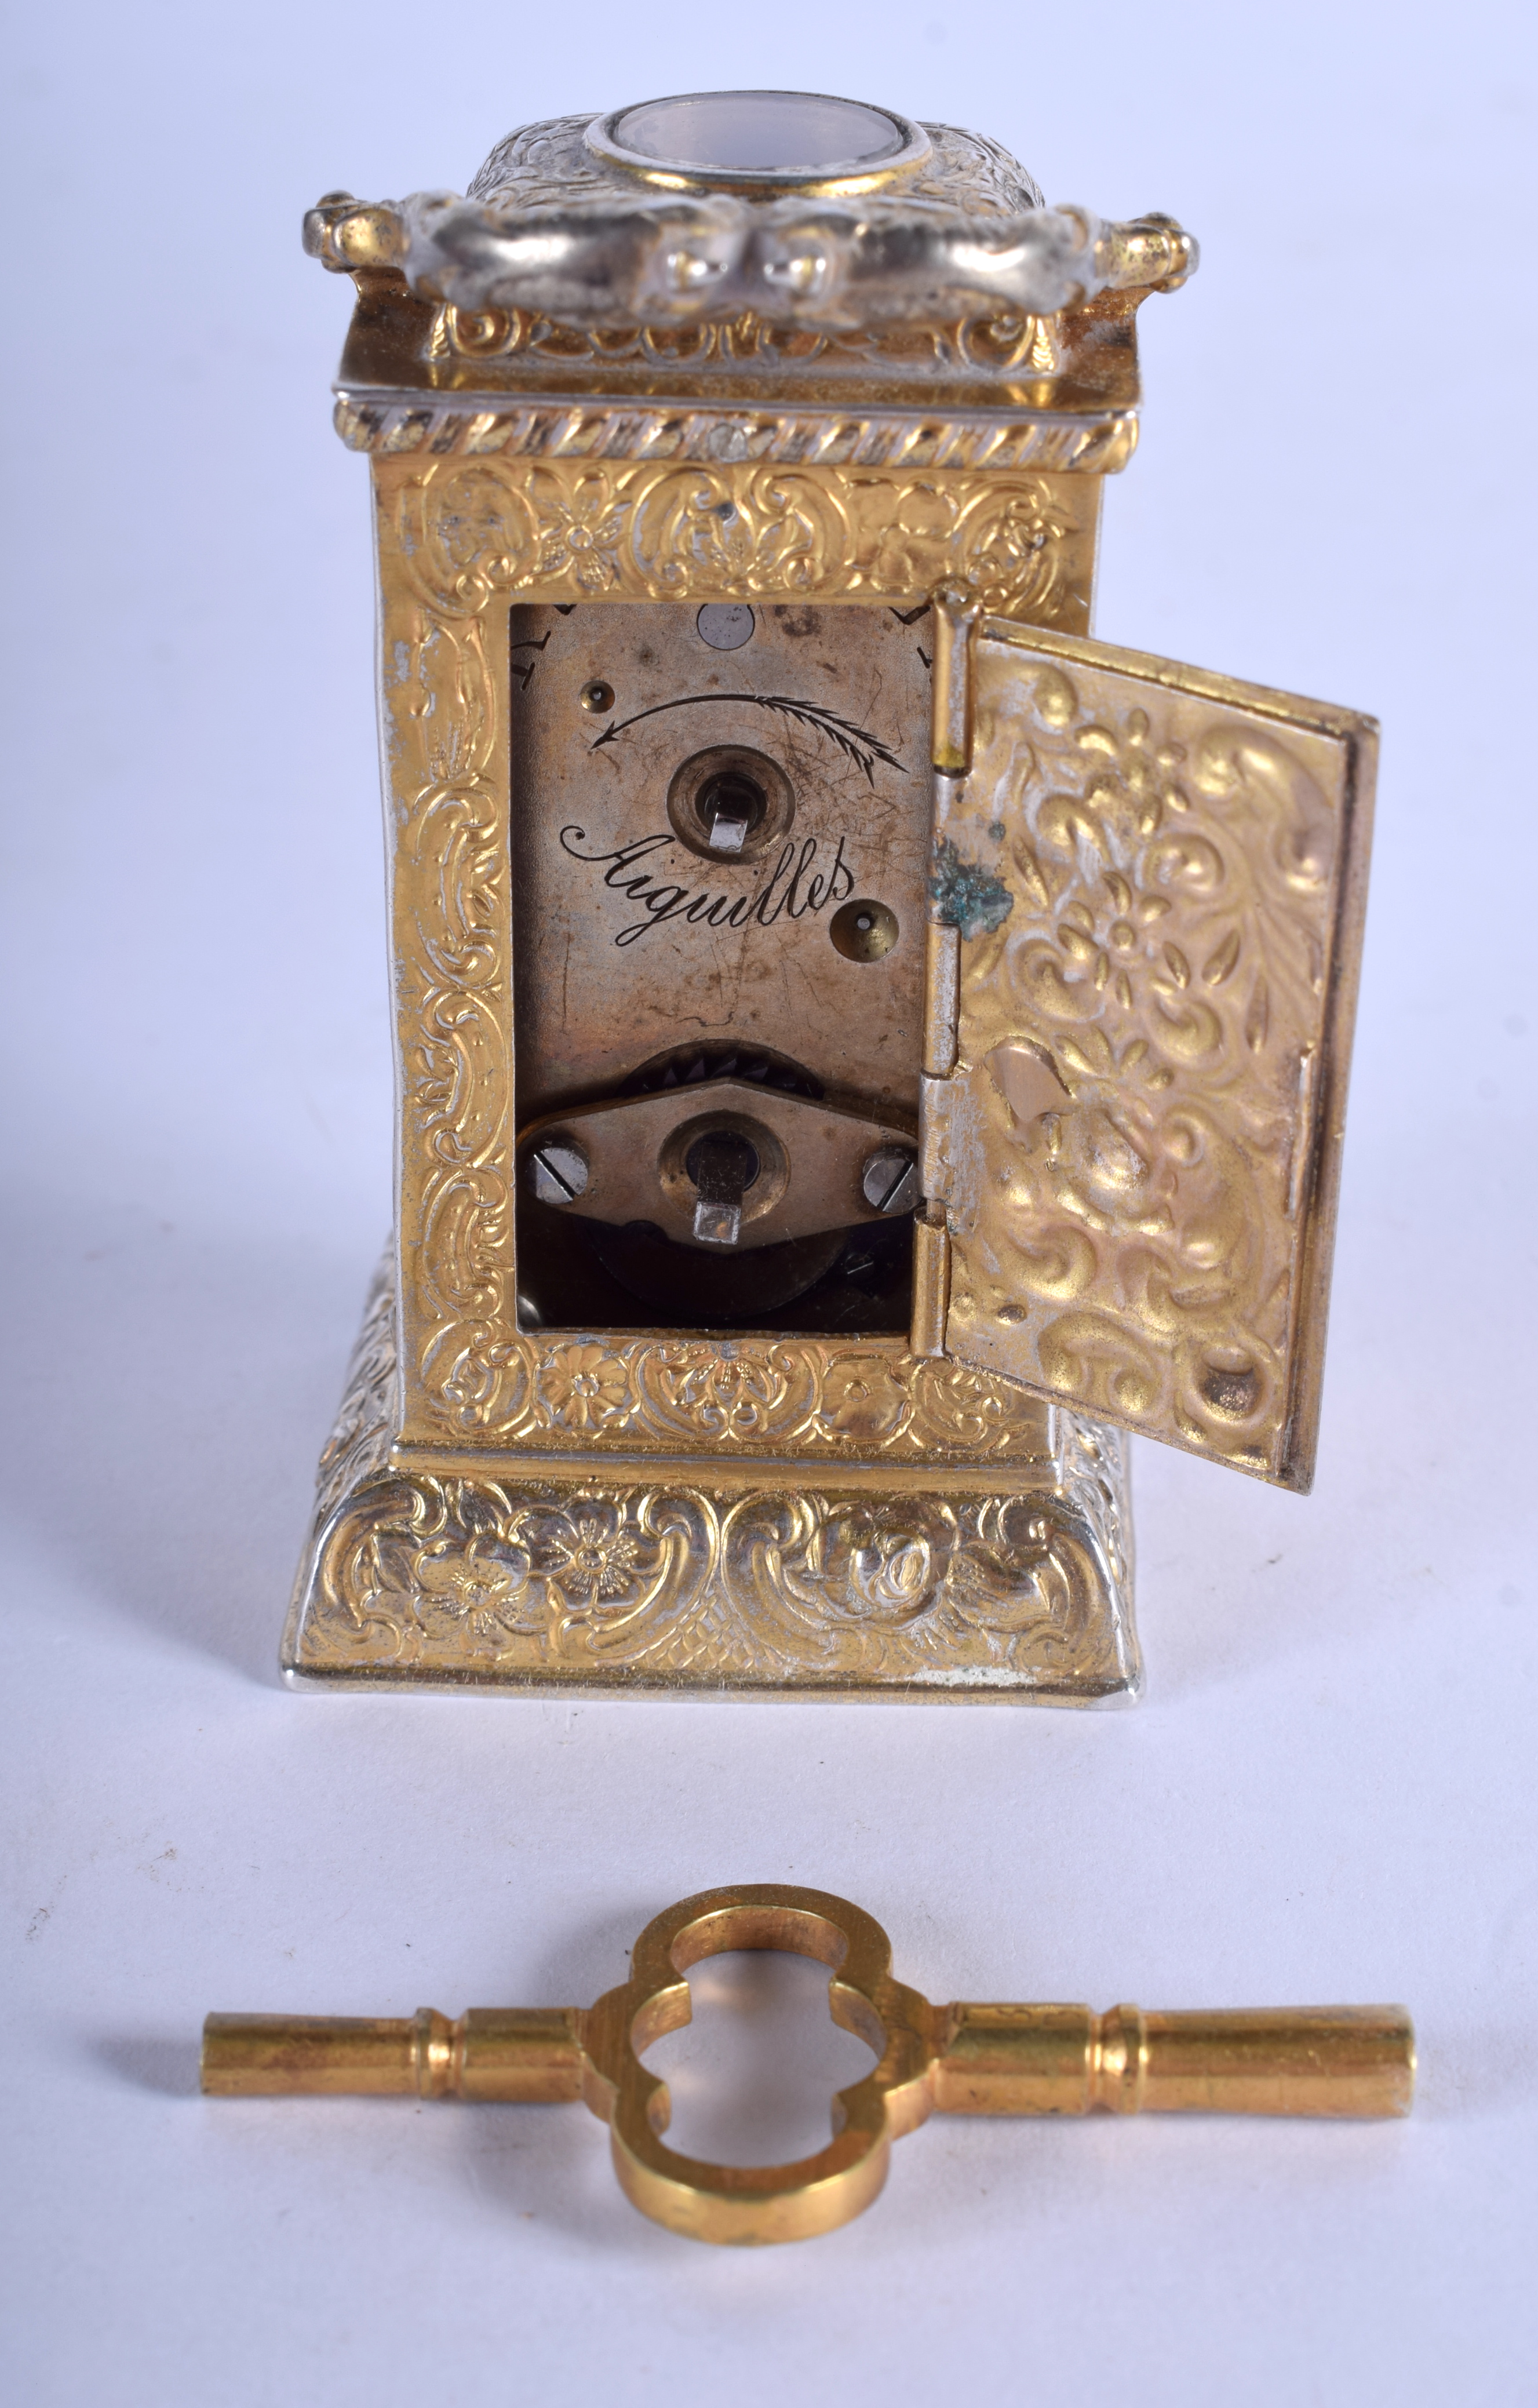 A LOVELY ANTIQUE MINIATURE TRAVELLING SILVER GILT CLOCK decorated with foliage and vines. 8.75 cm hi - Image 5 of 8